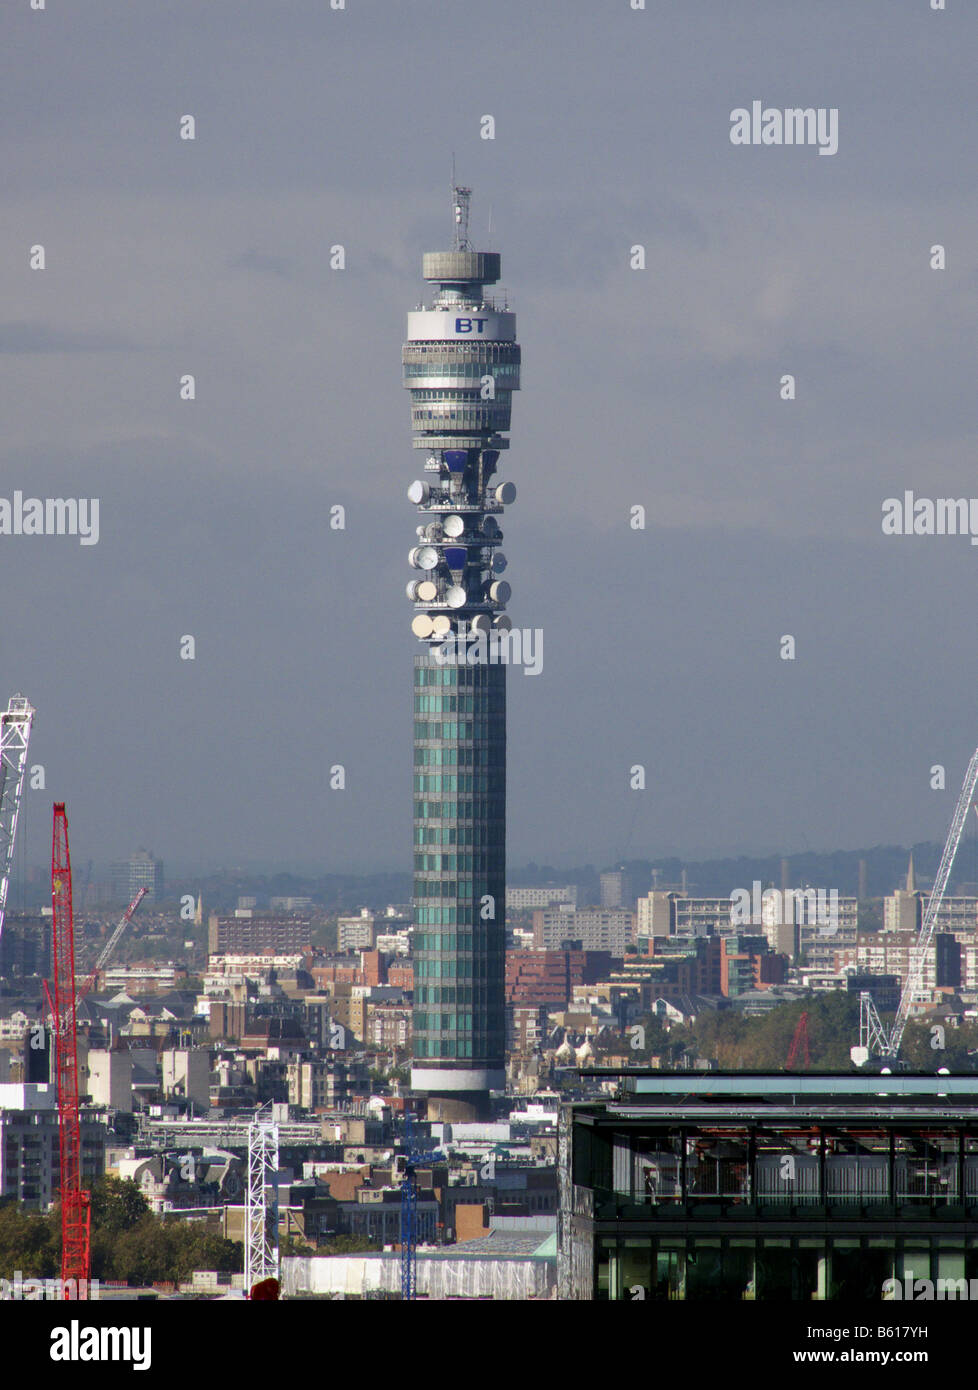 BT Tower formally known as Post Office Tower and British Telecom Tower, London, England. Stock Photo